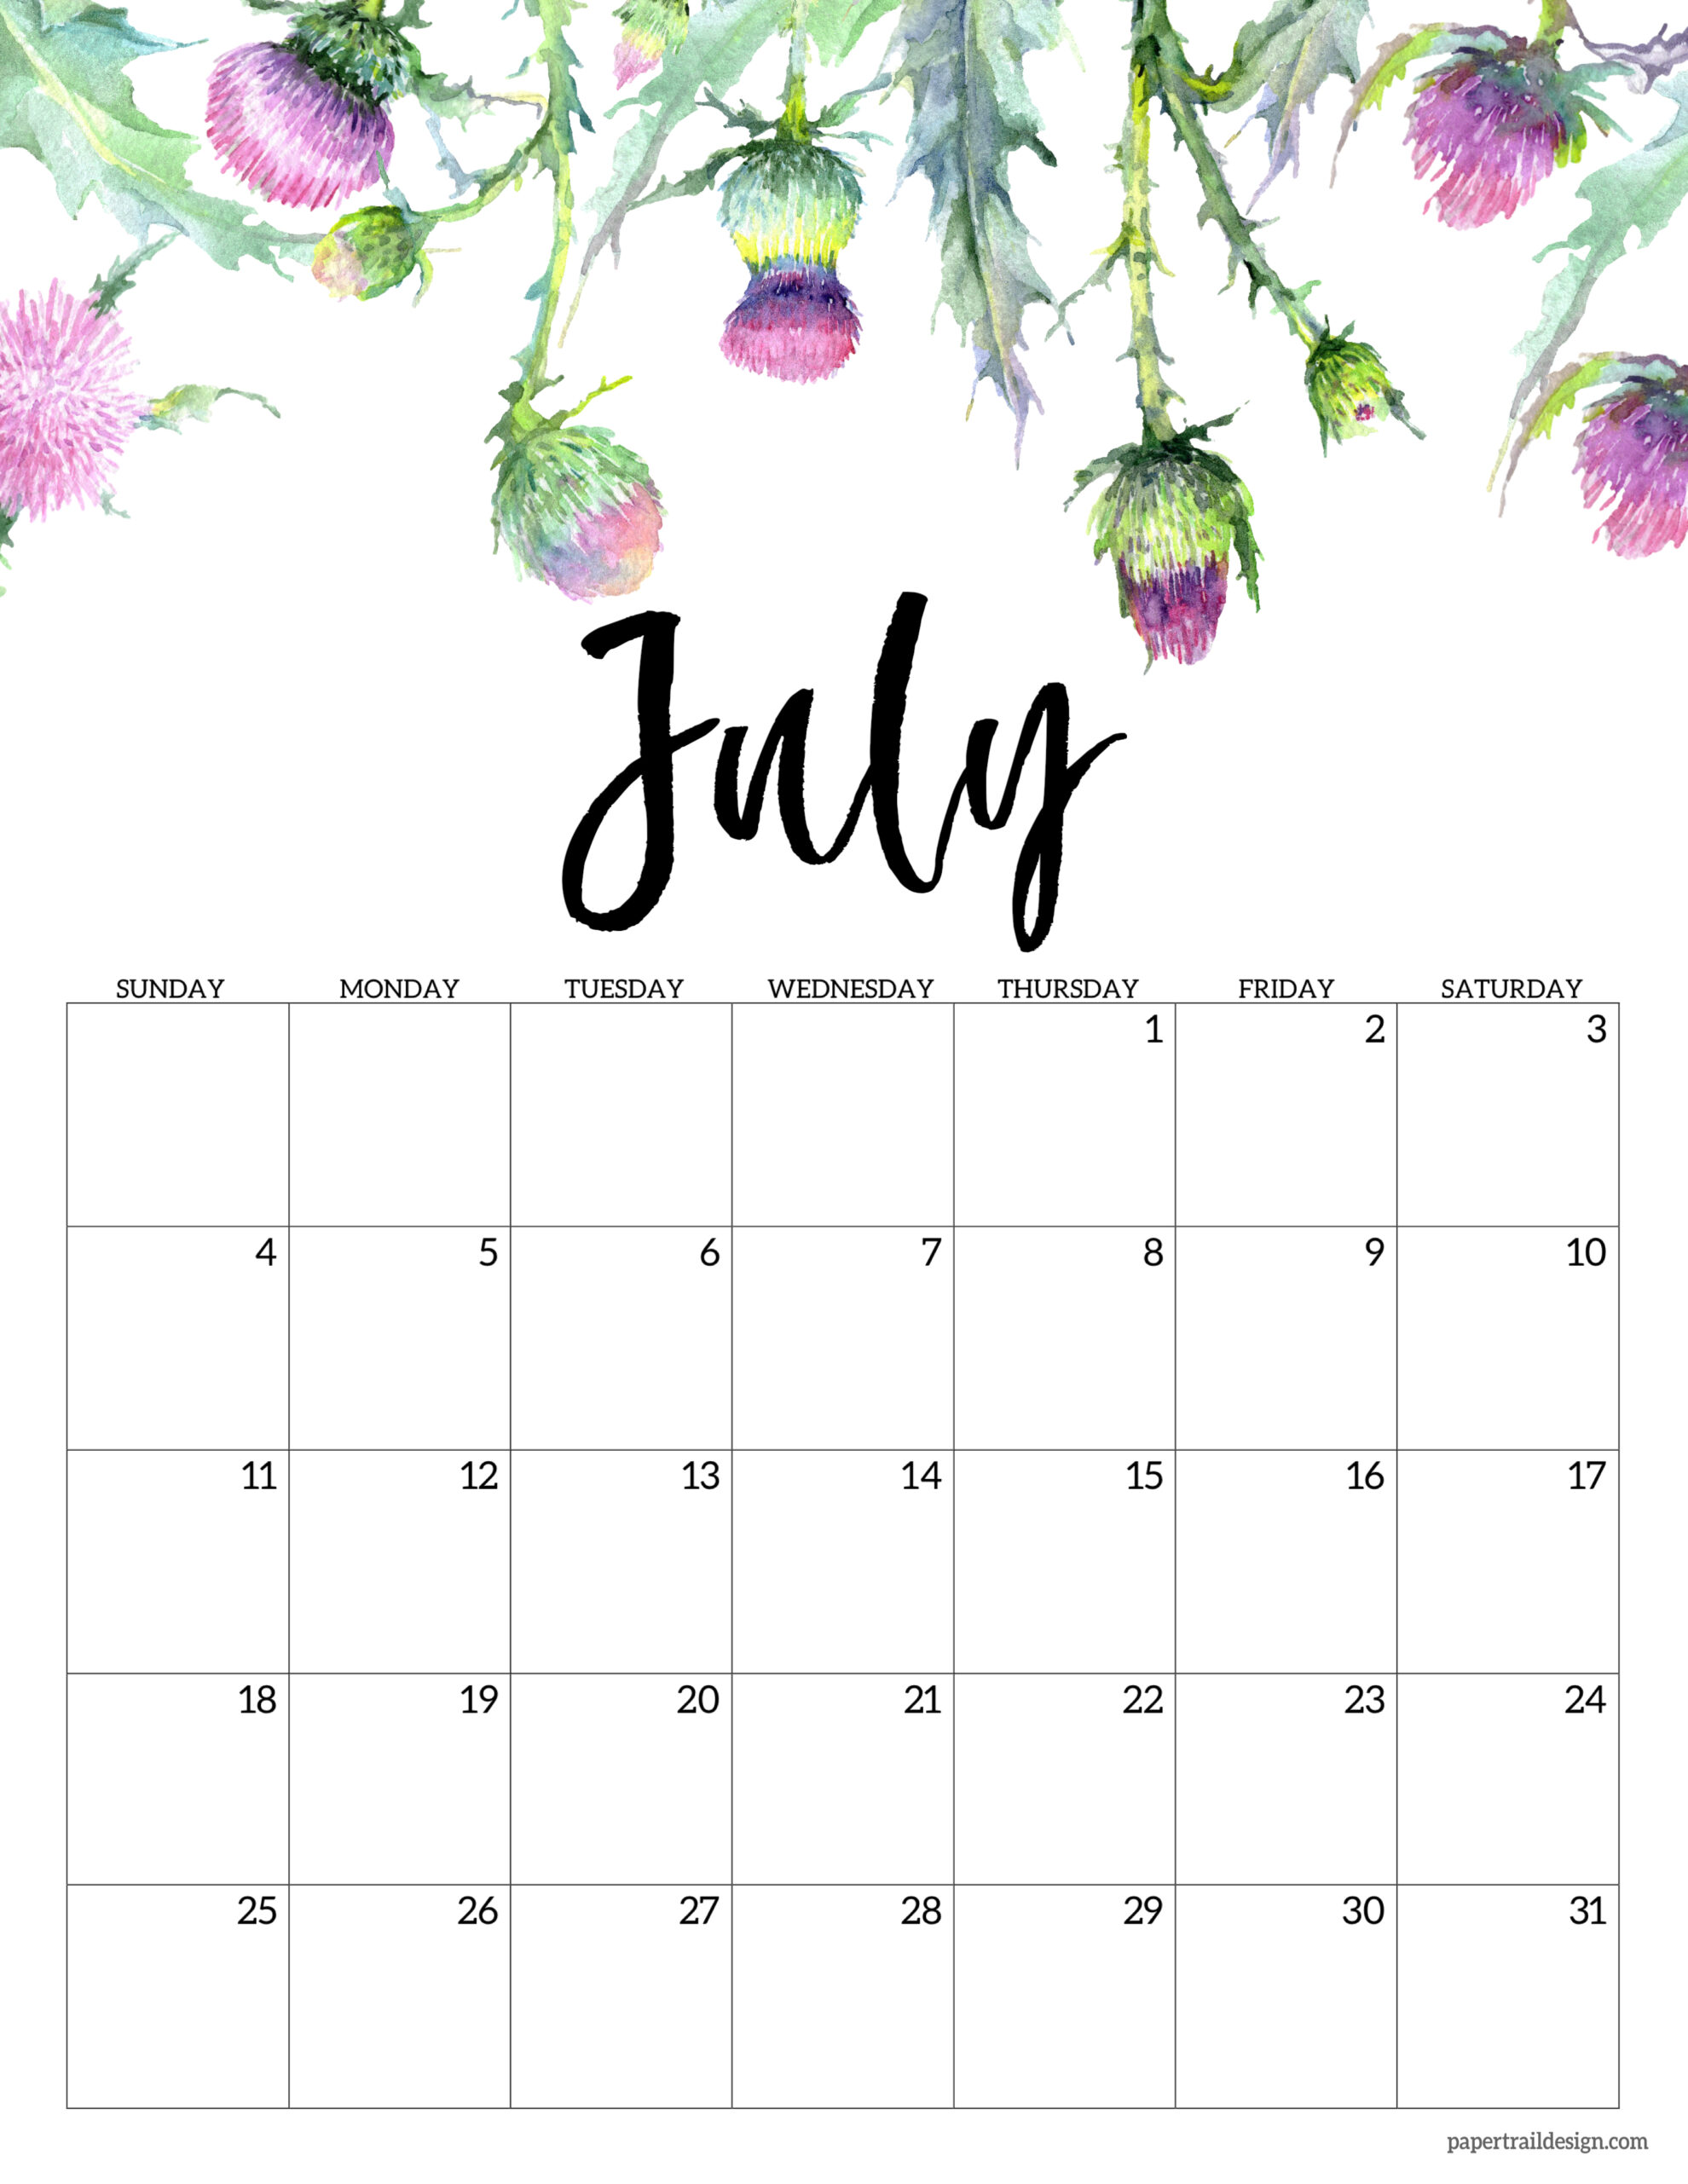 Featured image of post April 2021 Calendar Flowers - In our april 2021 calendar, you will find 30 days.